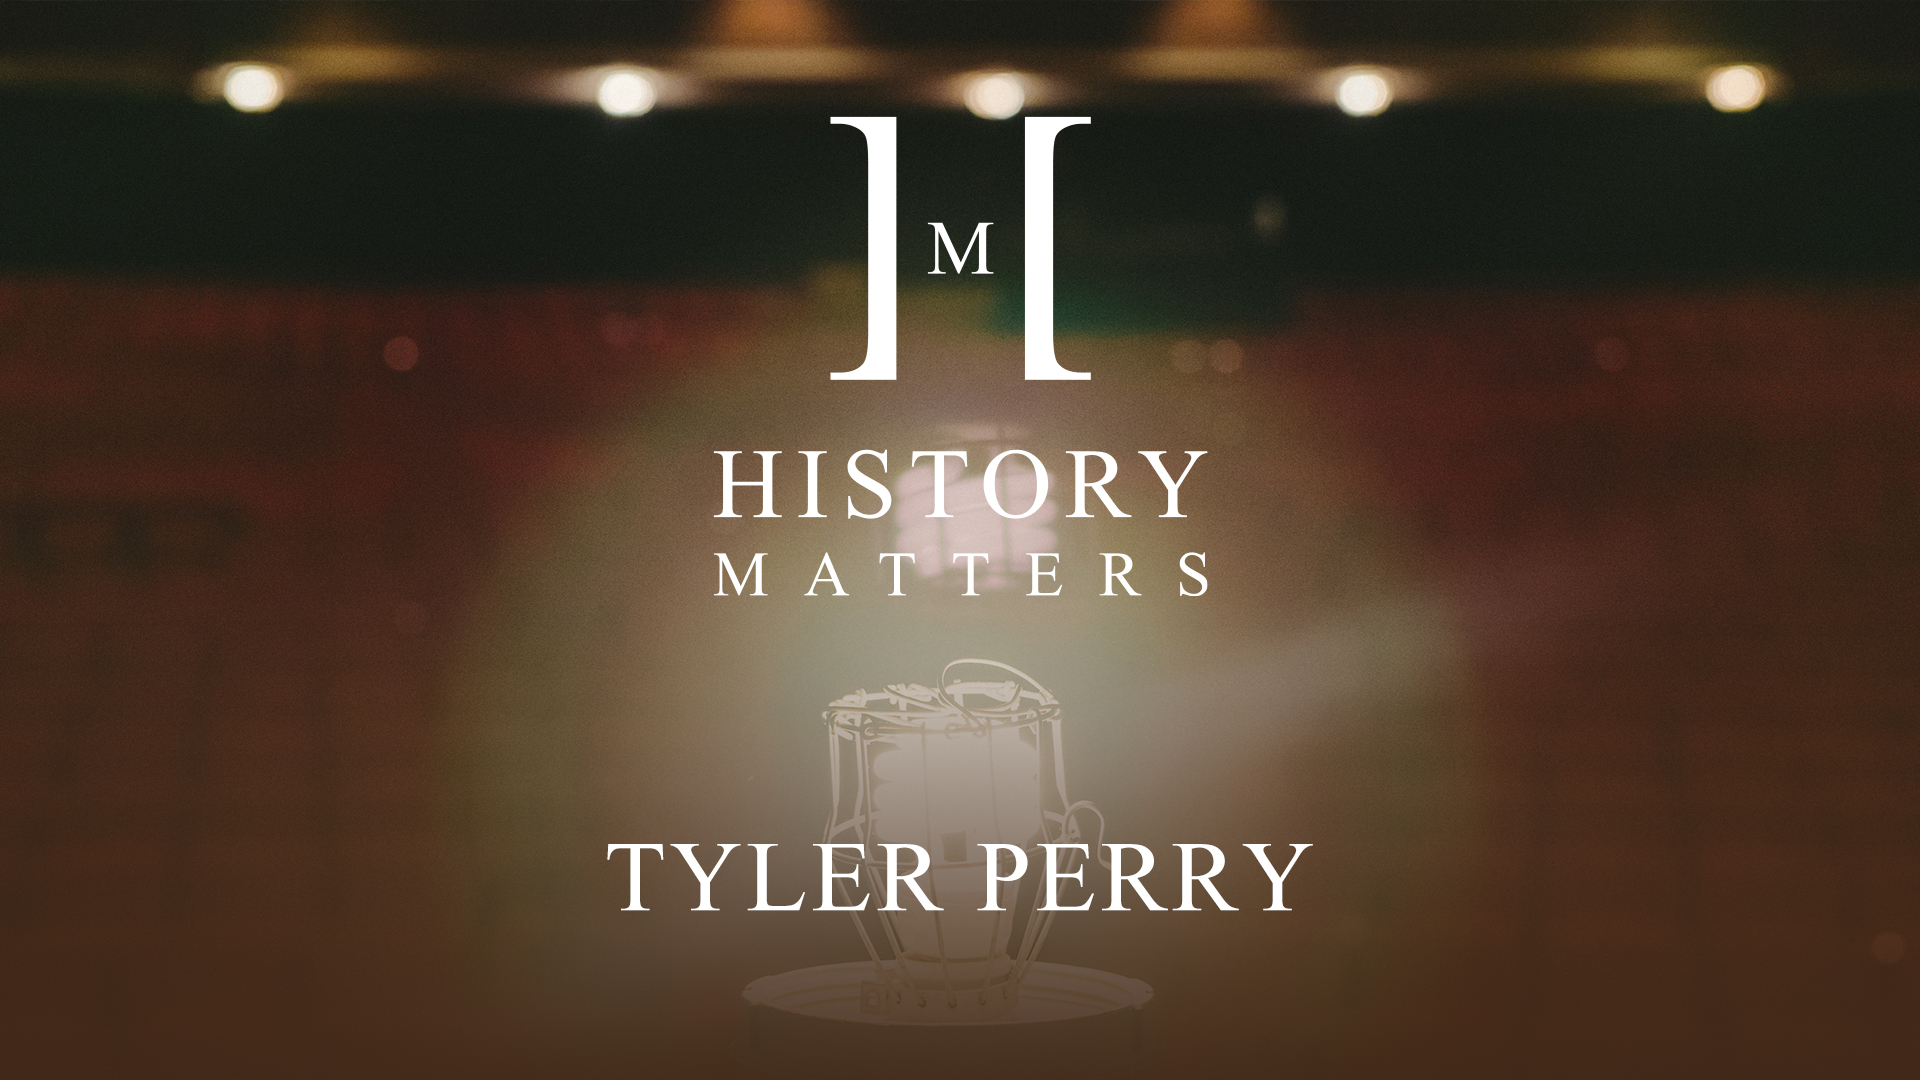 White History Matters Tyler Perry by Amber Fox logo with dimmed background of red theater seats